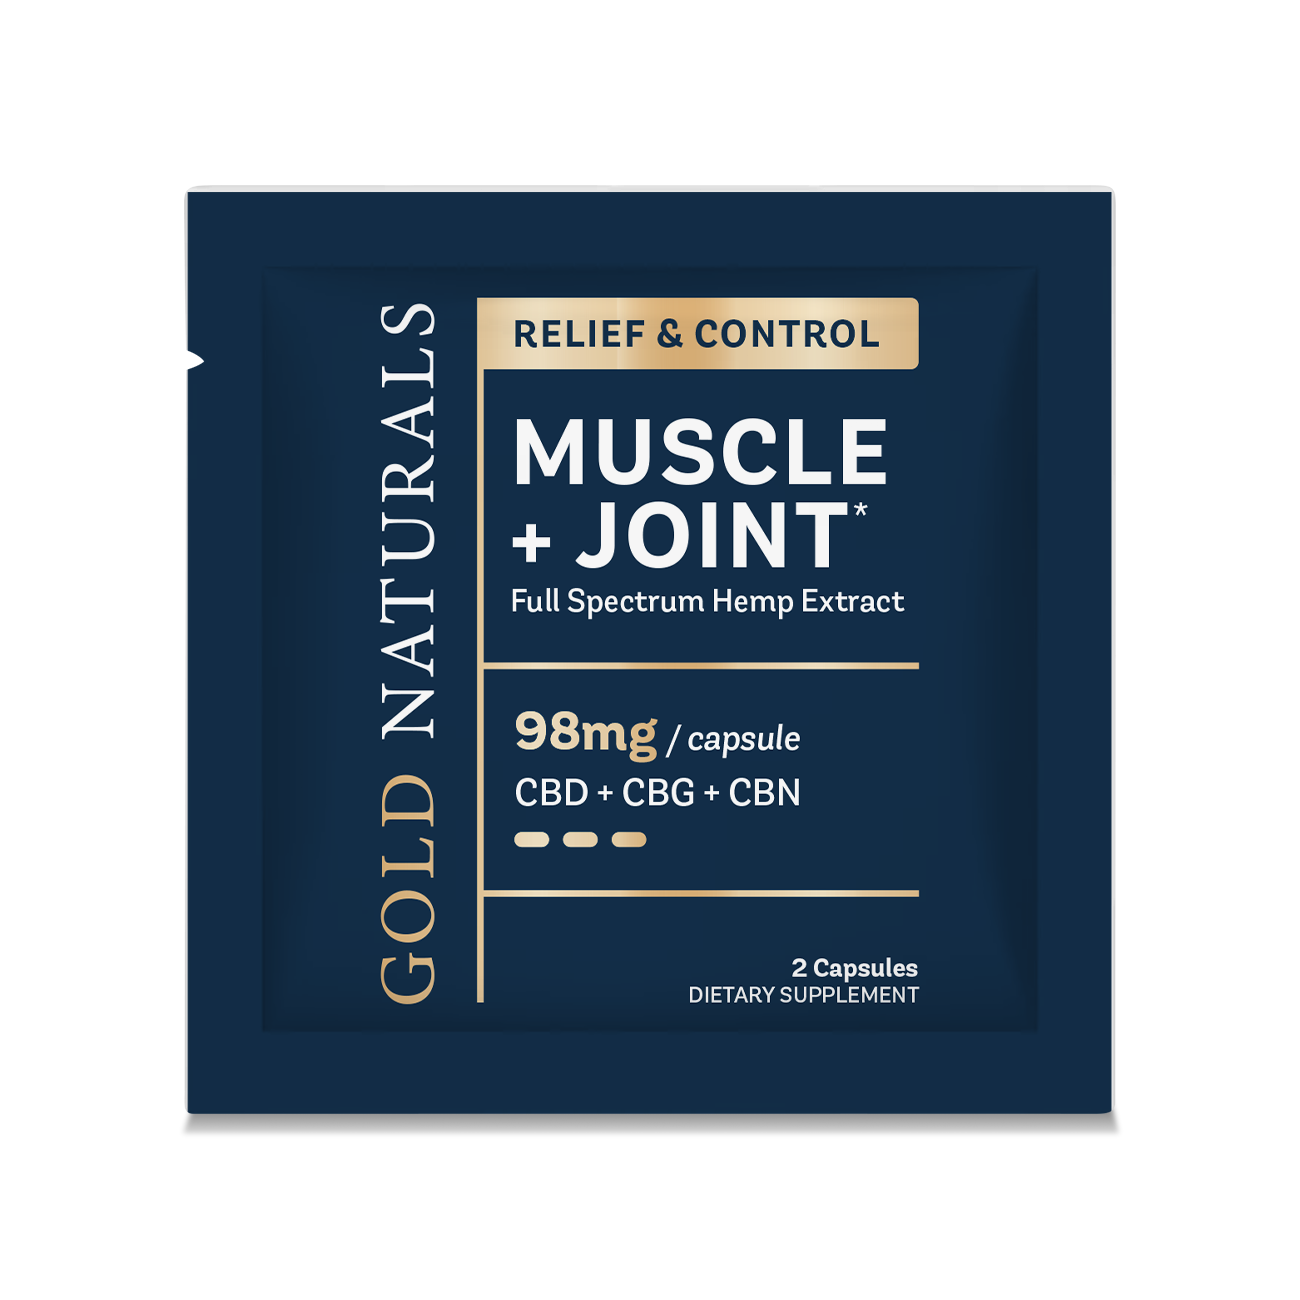 Muscle + Joint Soft Gels Sample Pack